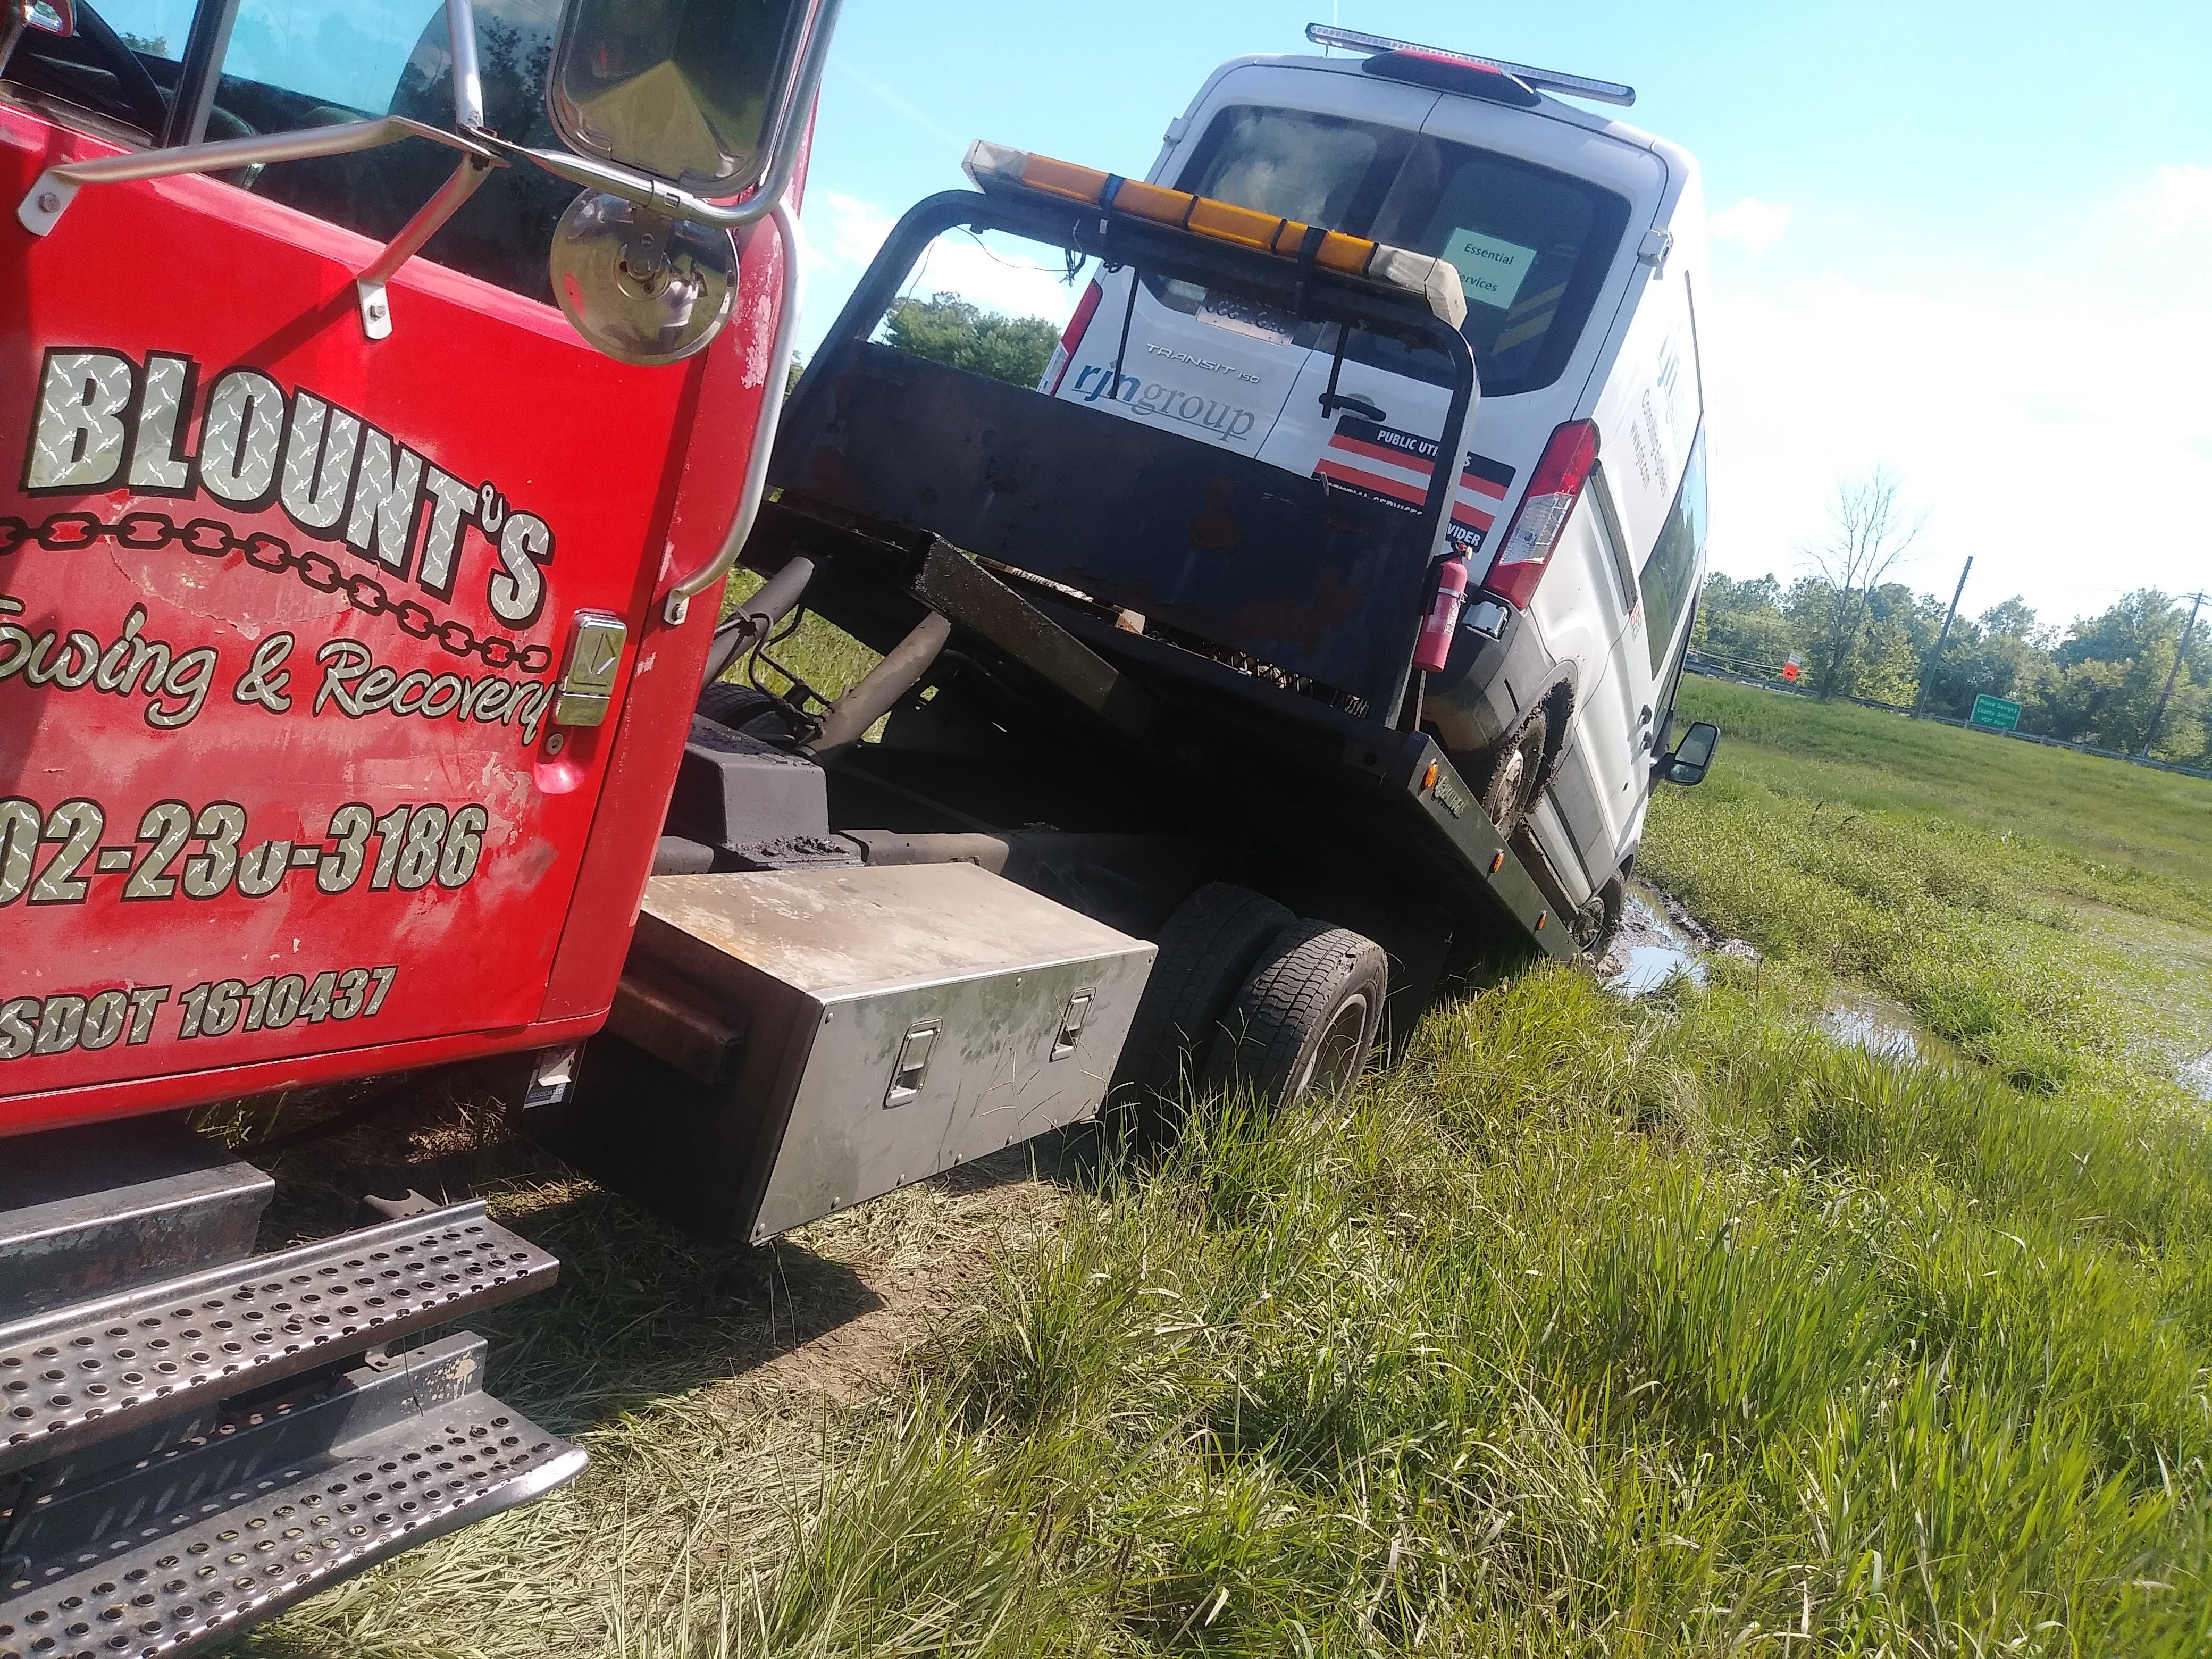 Blount's Towing Service